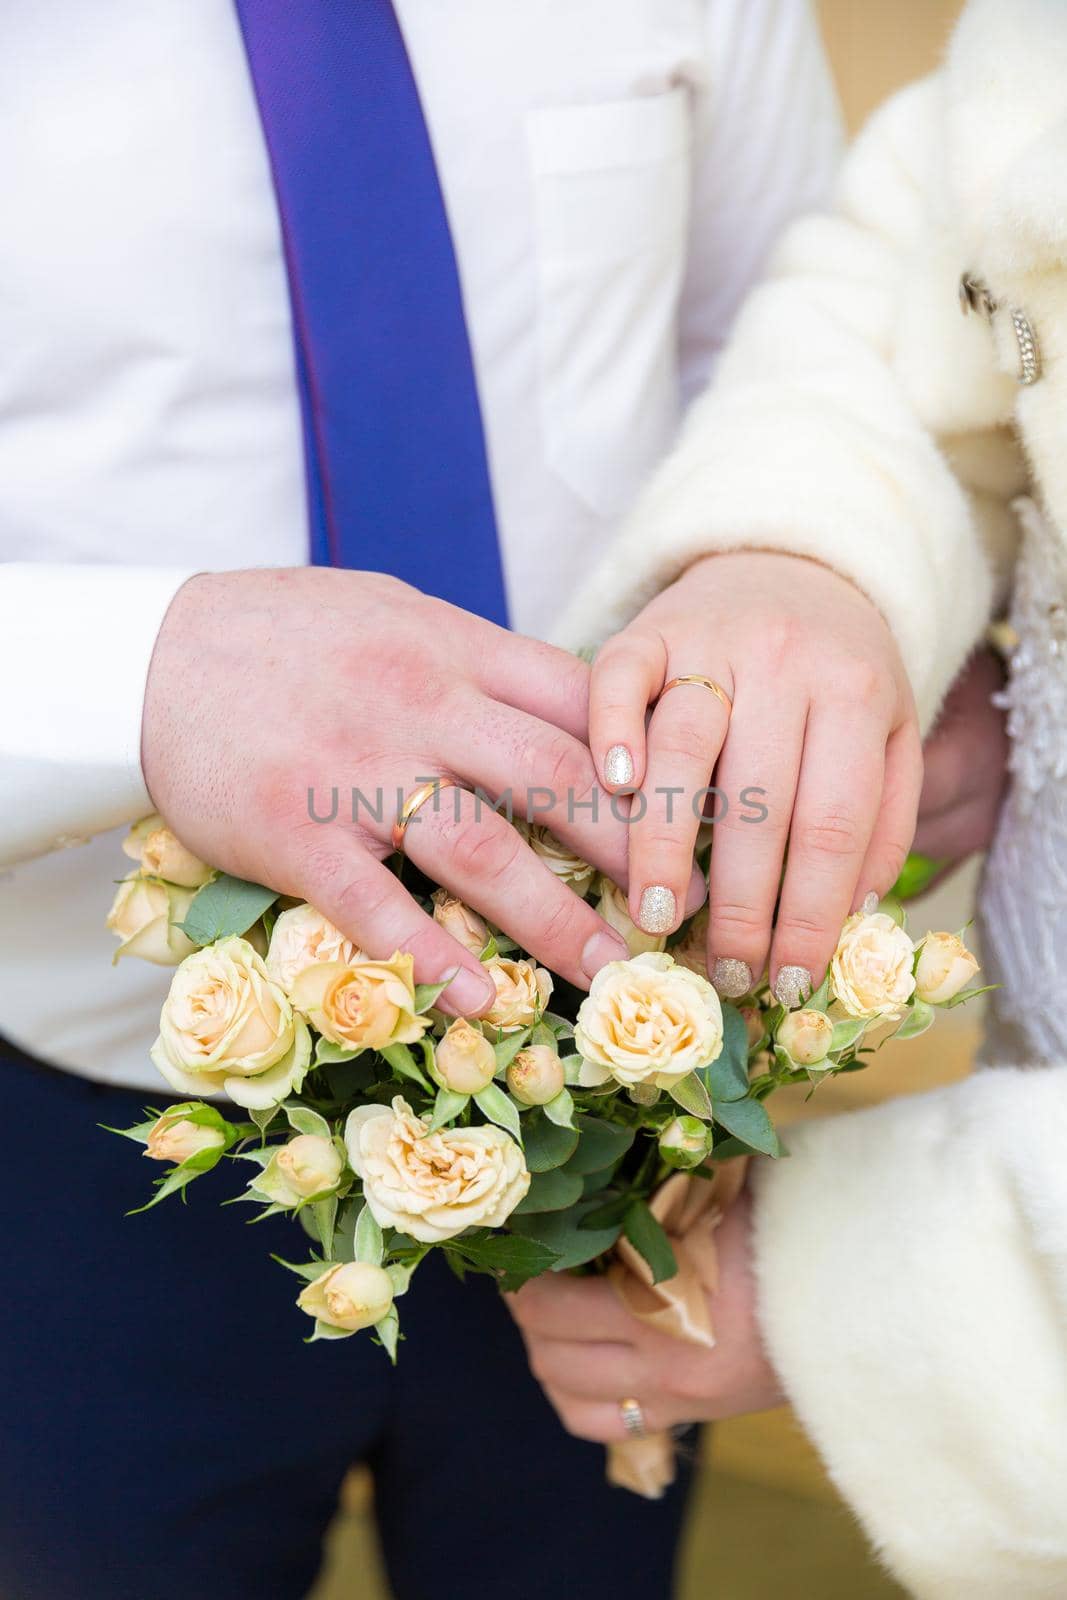 The hands of the newlyweds hold flowers by diczman